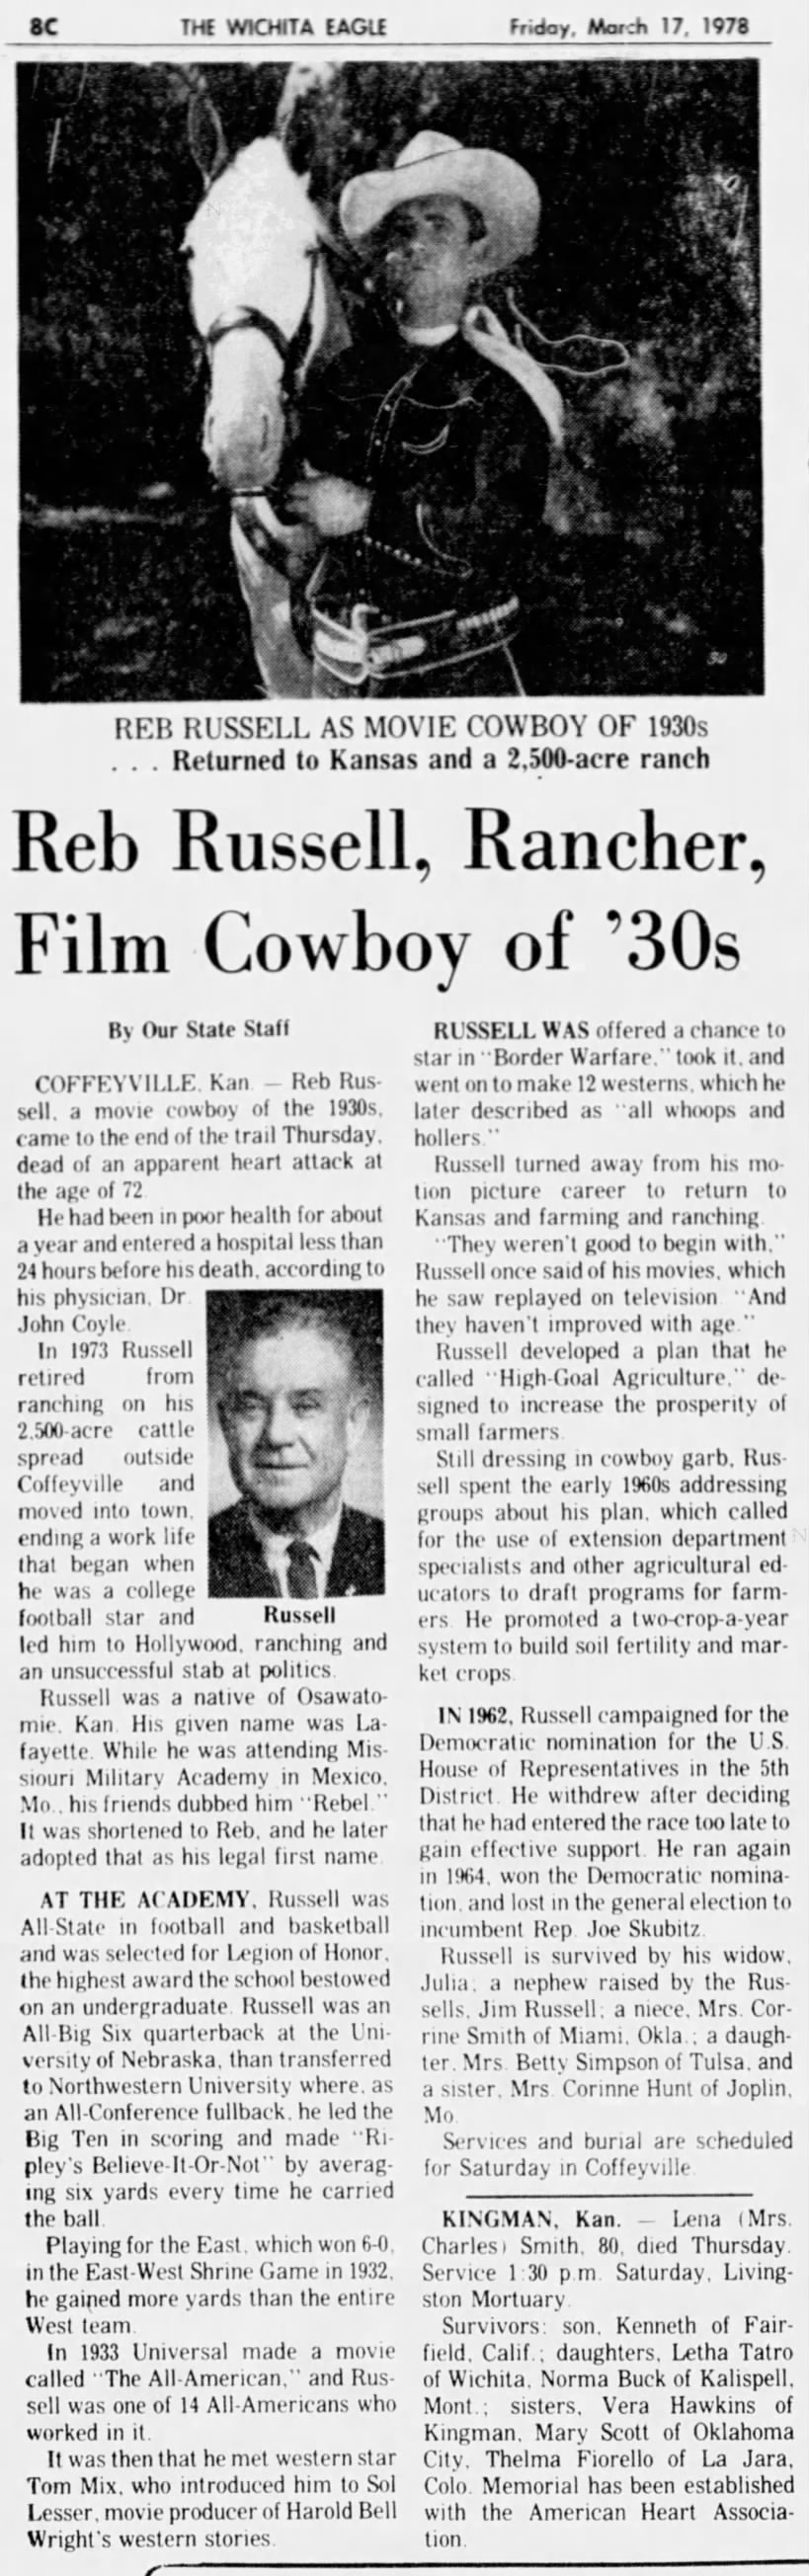 1978 death notice for Lafayette H. Russell. He was western movie hero "Reb Russell".